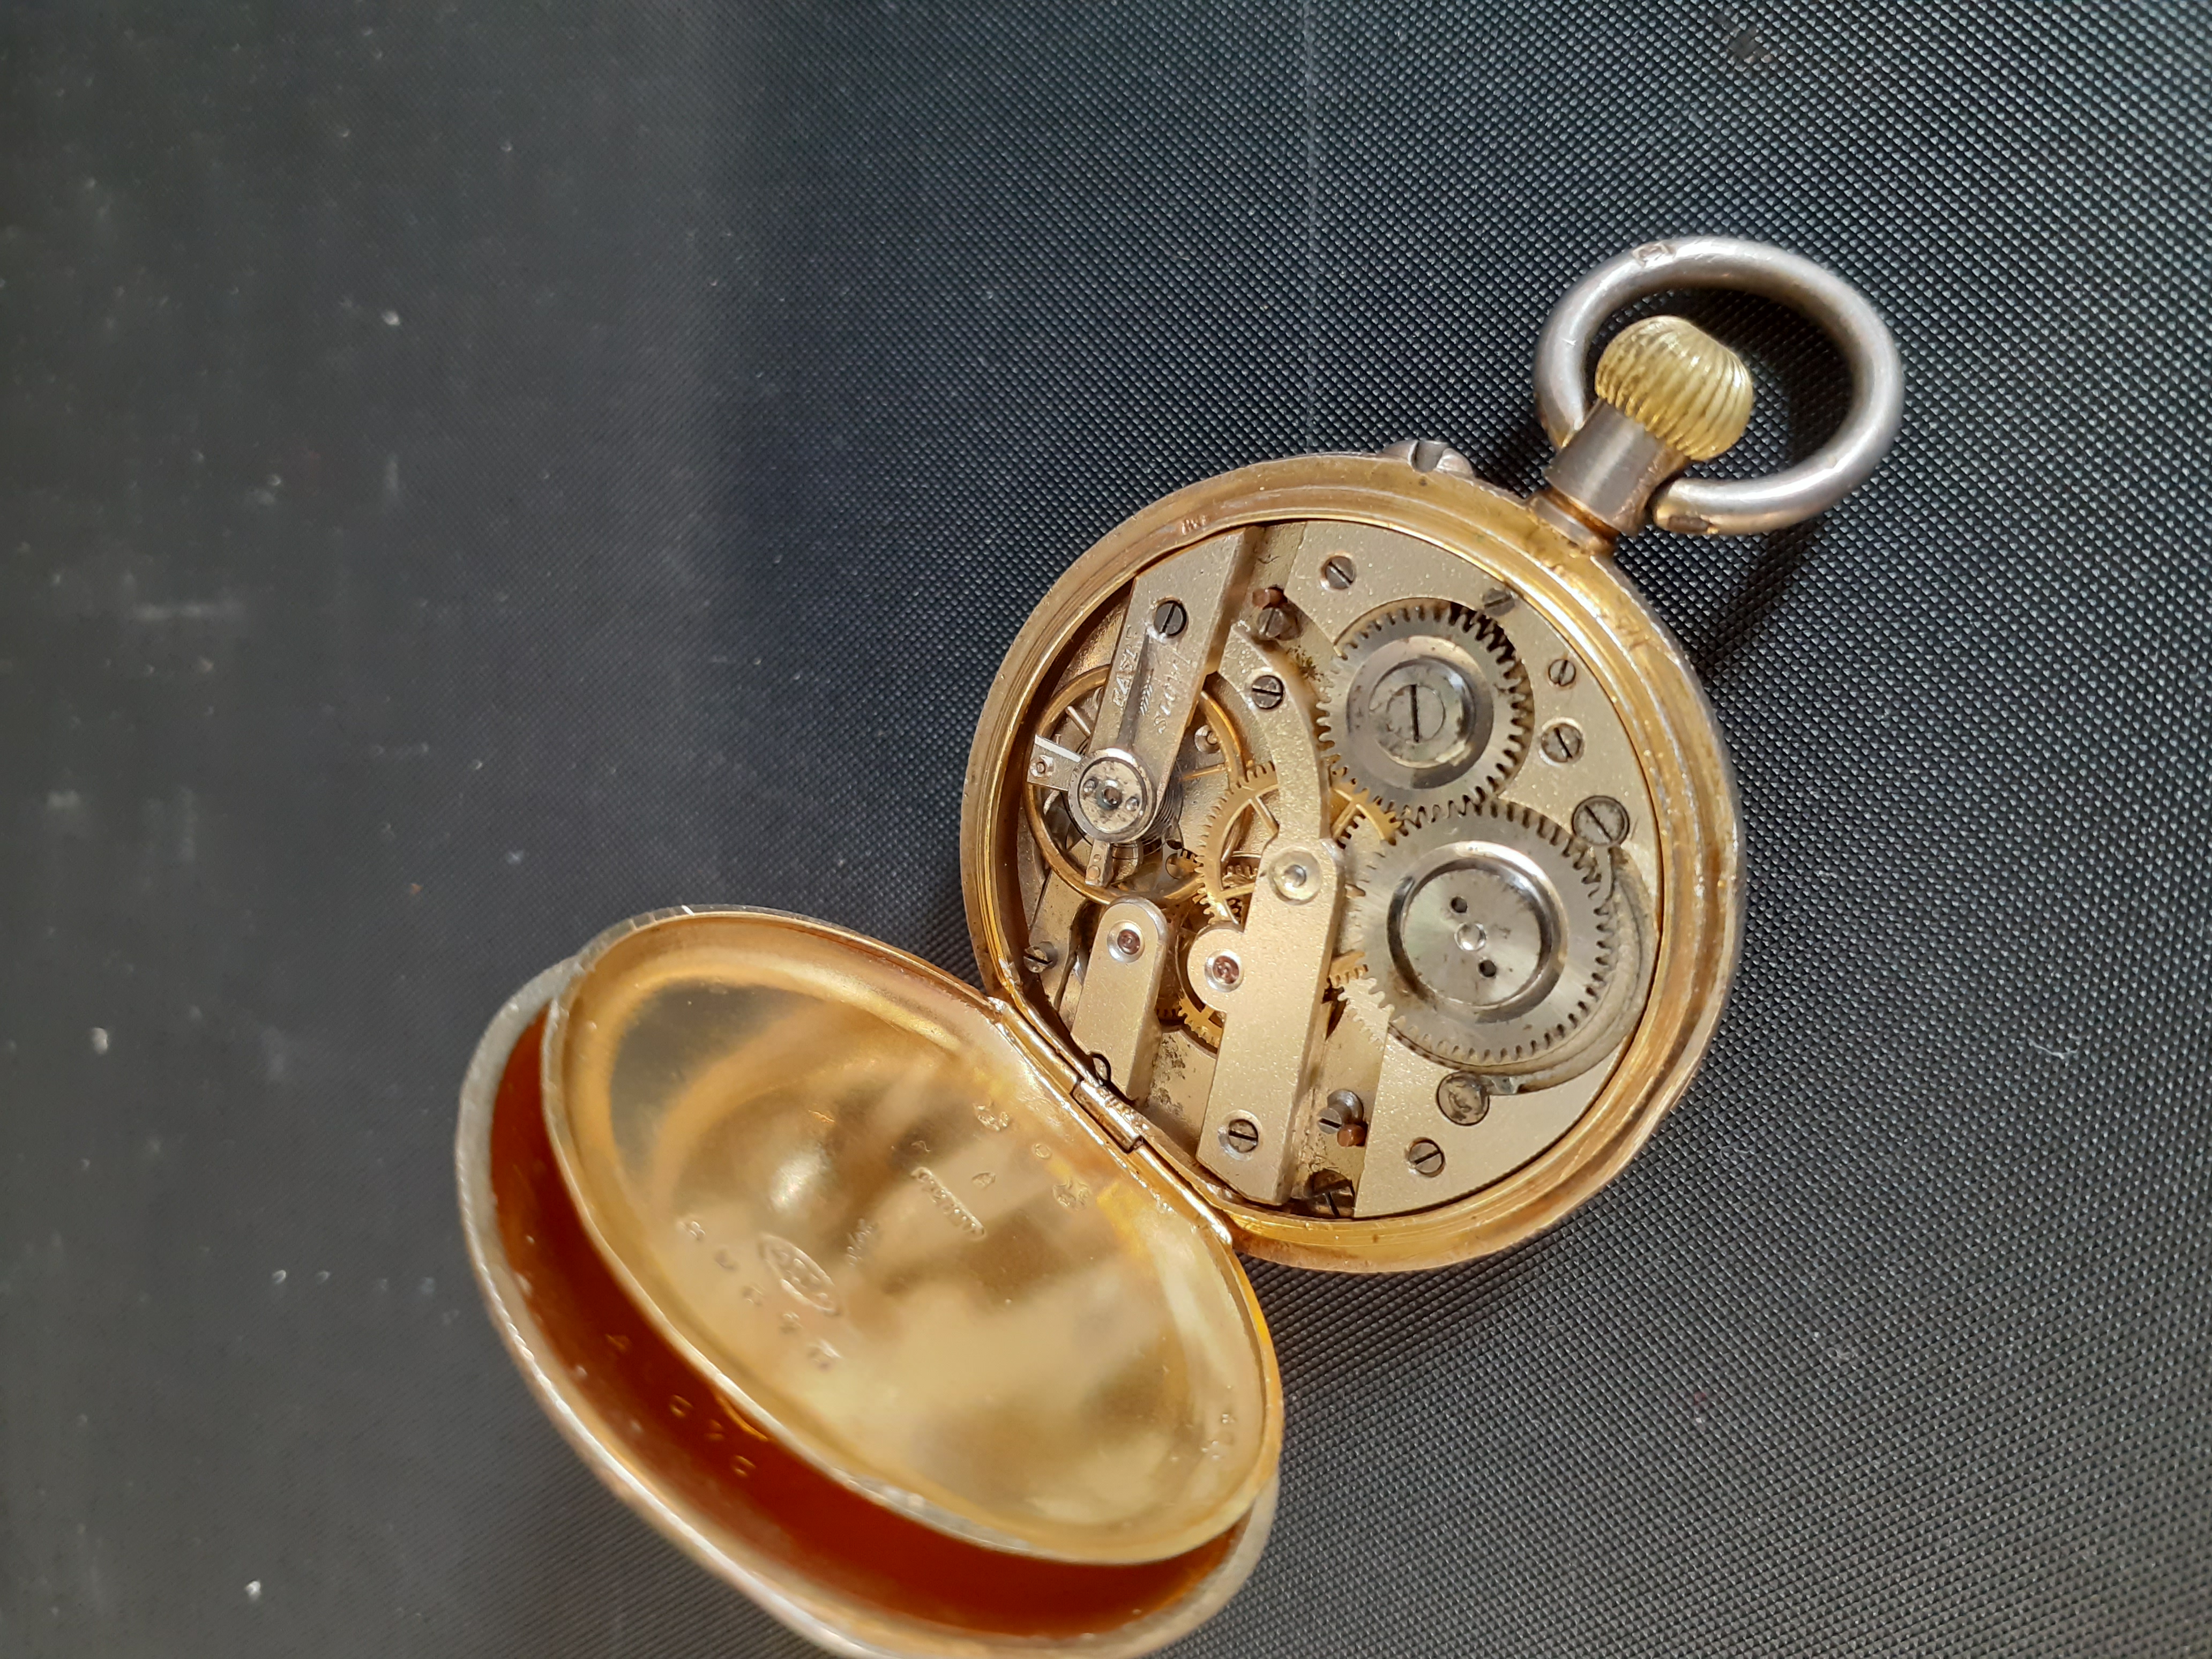 Continental silver gilt top wind fob watch marked 935 with engine turned case, heart shaped - Image 3 of 3